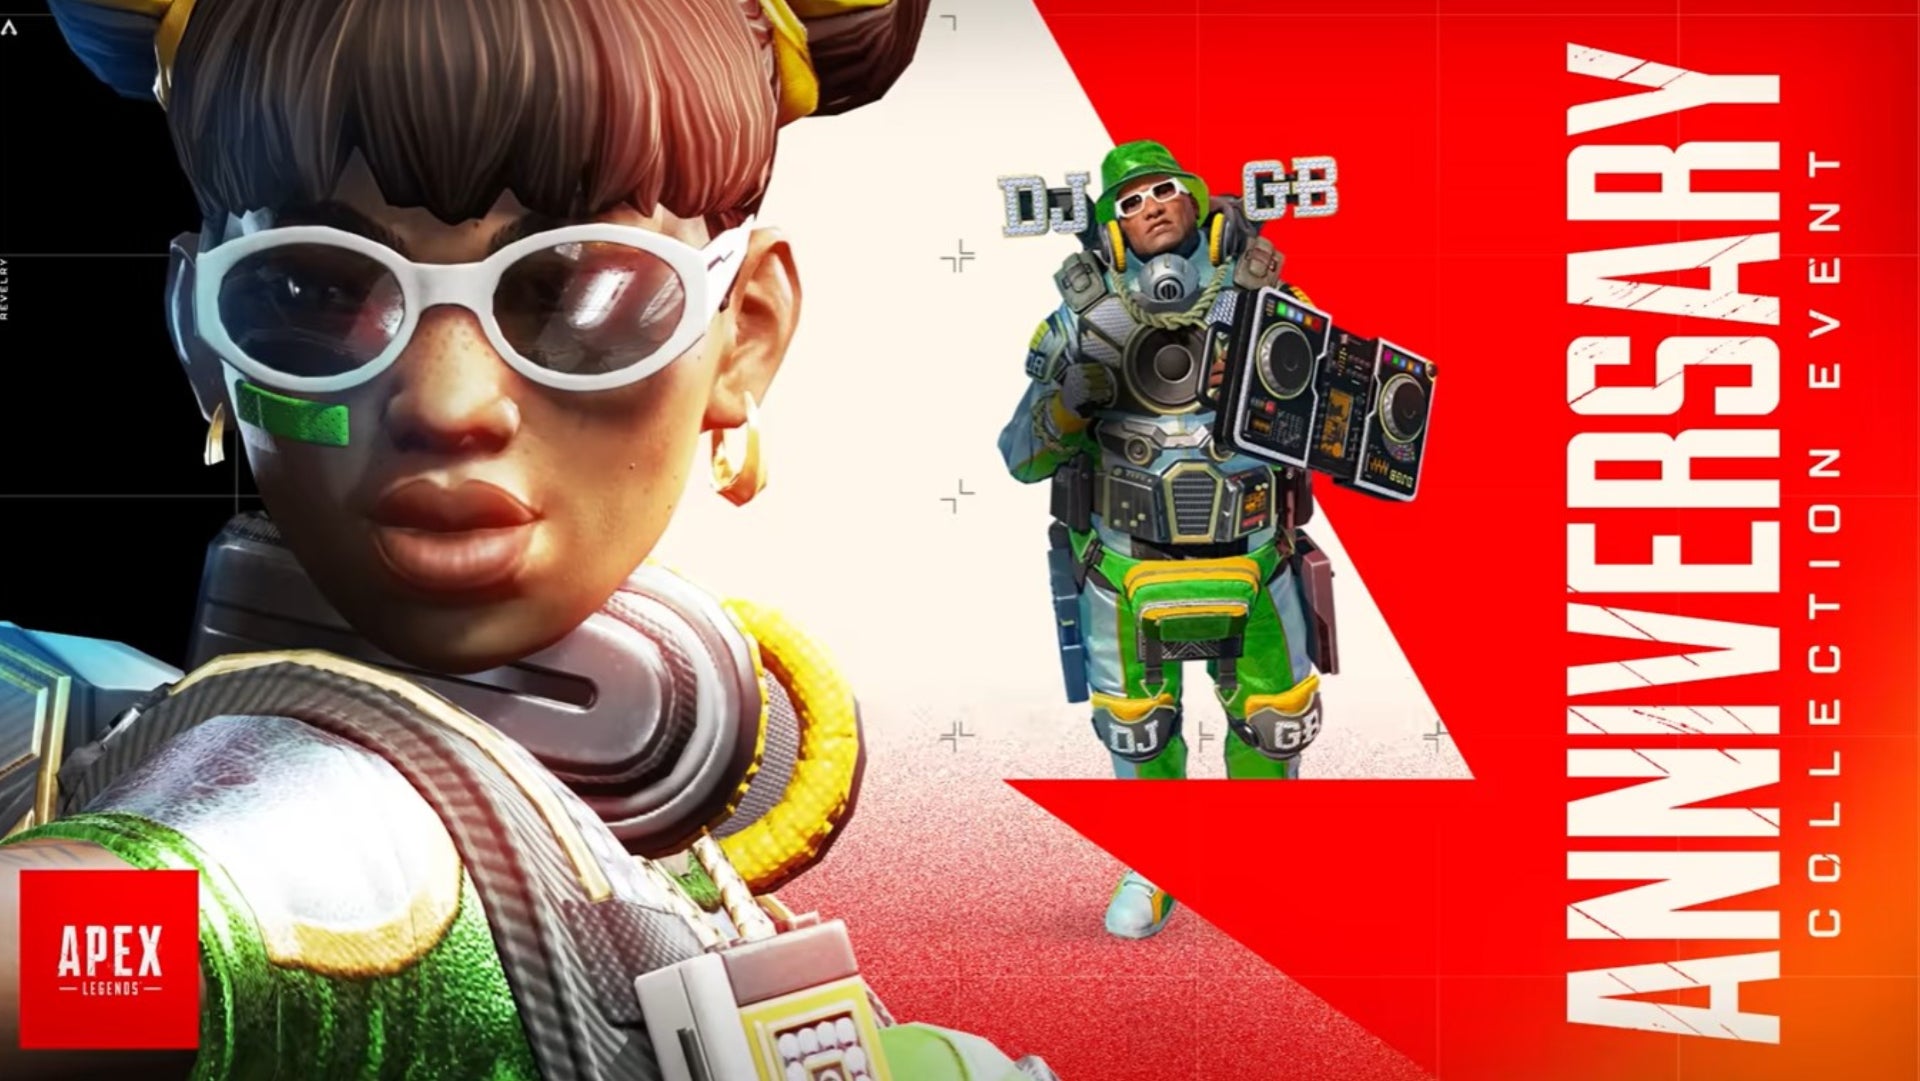 Apex Legends, official Anniversary Collection event title art from Respawn depicting Lifeline on the left and Gibraltar in the background.